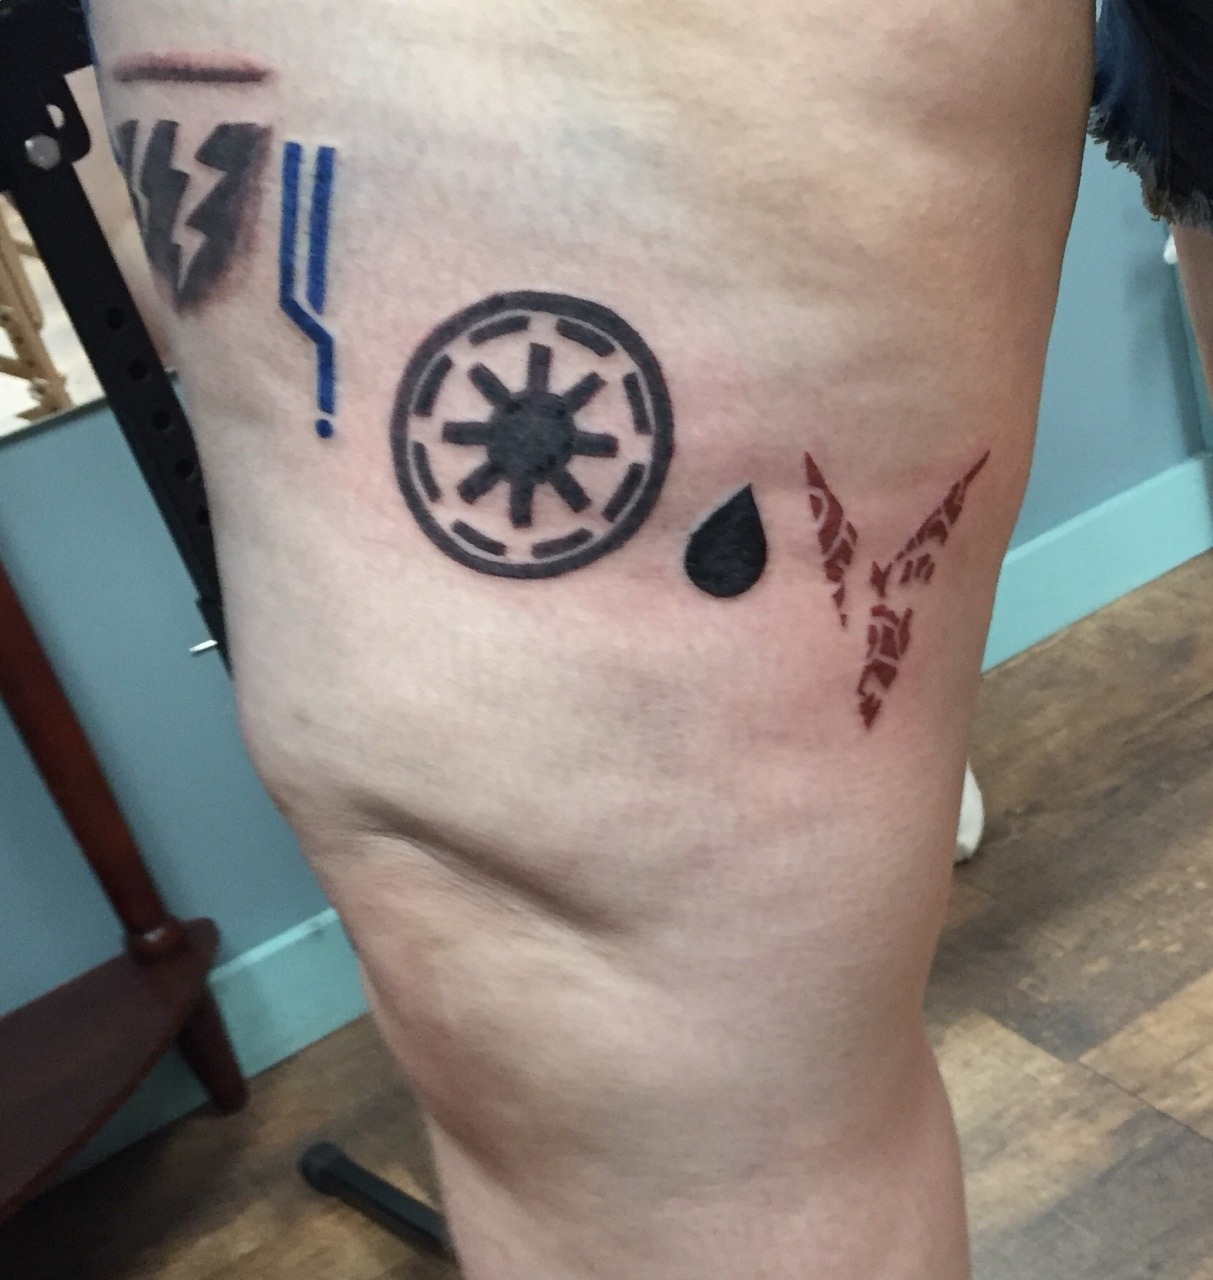 Fans Share Their Tattoos with InkedStarWars  Tattoo Ideas Artists and  Models